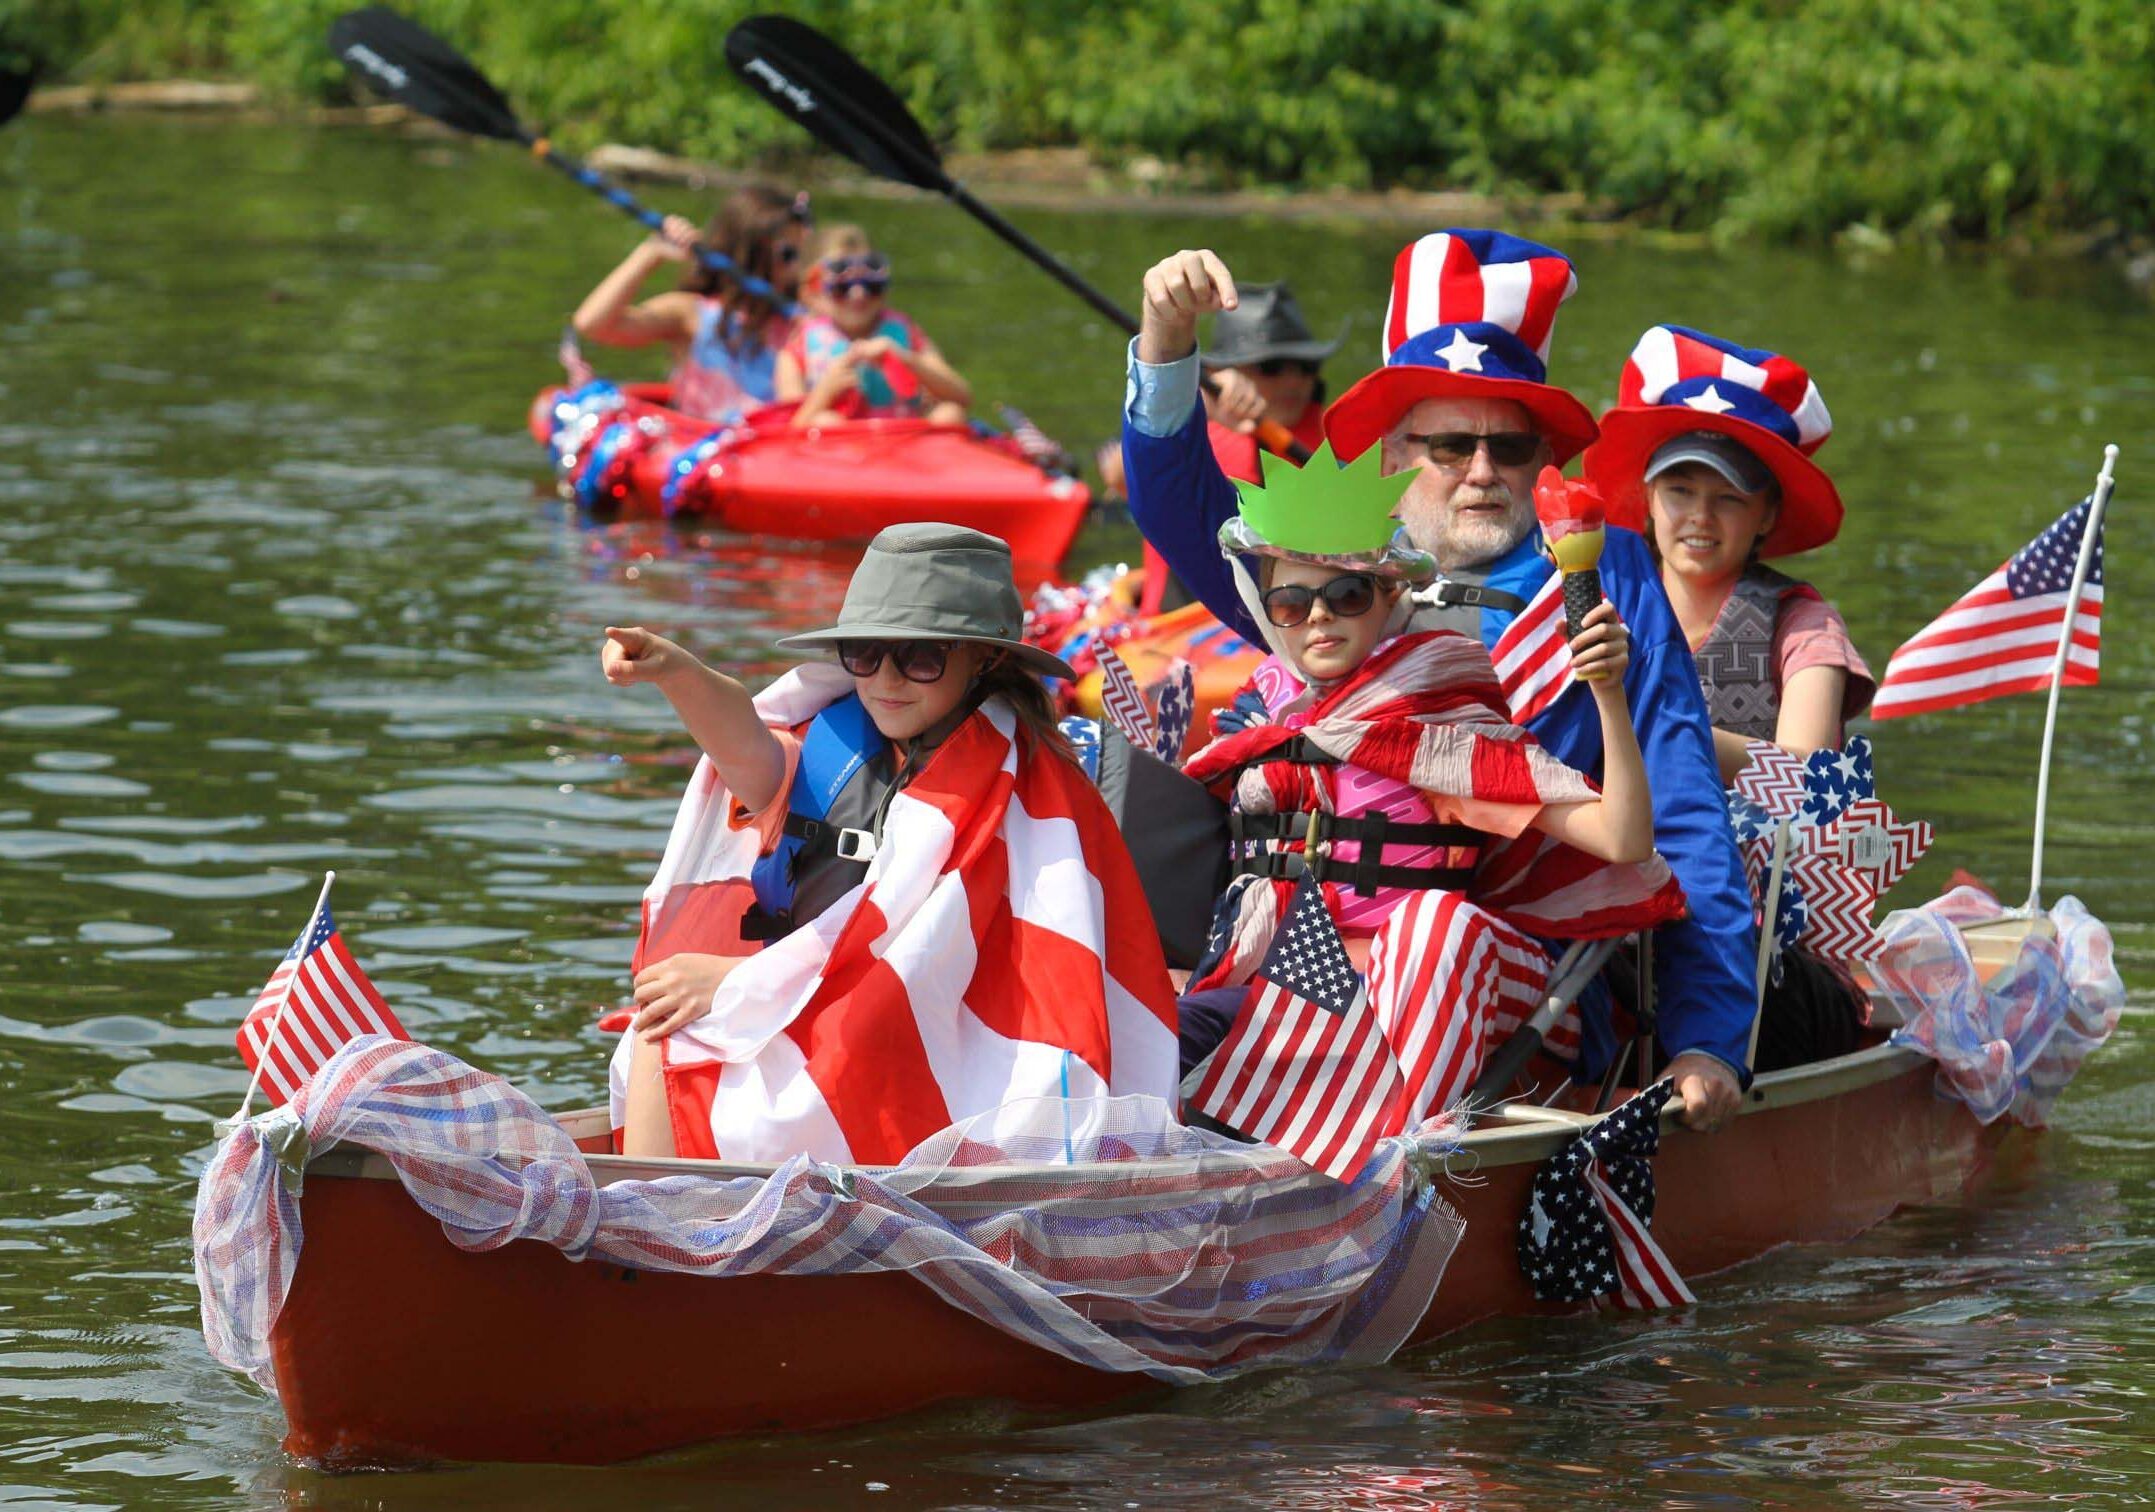 Participants in decorated kayaks and canoes participate in a flotilla parade as part of Independence Day Celebrations